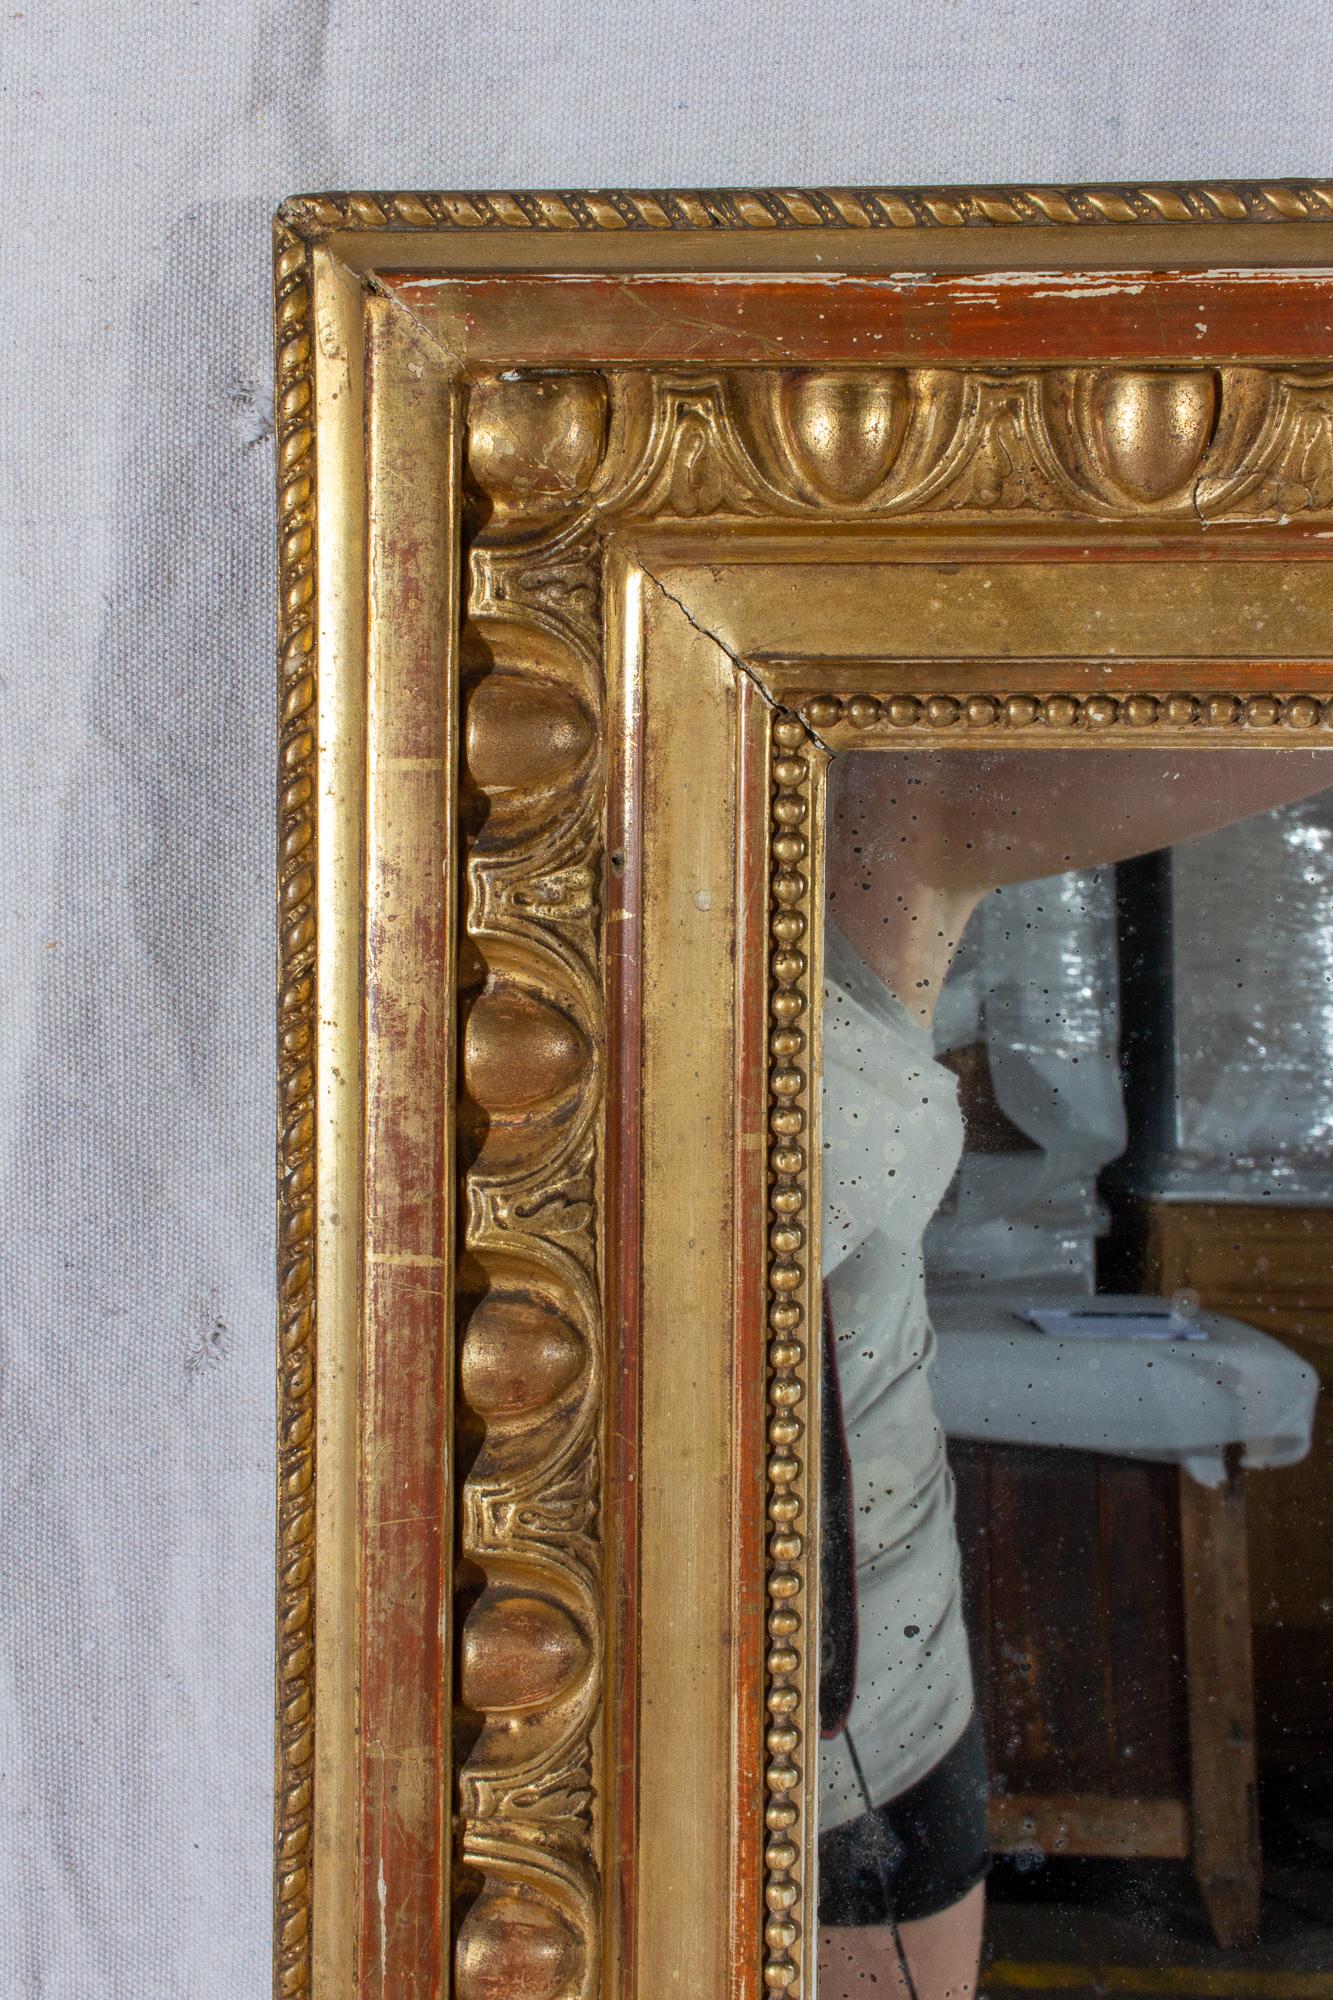 This is an antique French mirror with original glass, in a decorated, rectangular gilt frame featuring gold, bronze and red tones. The frame is somewhat distressed, with losses to the plaster and gilt. The mirror itself does show some age and there